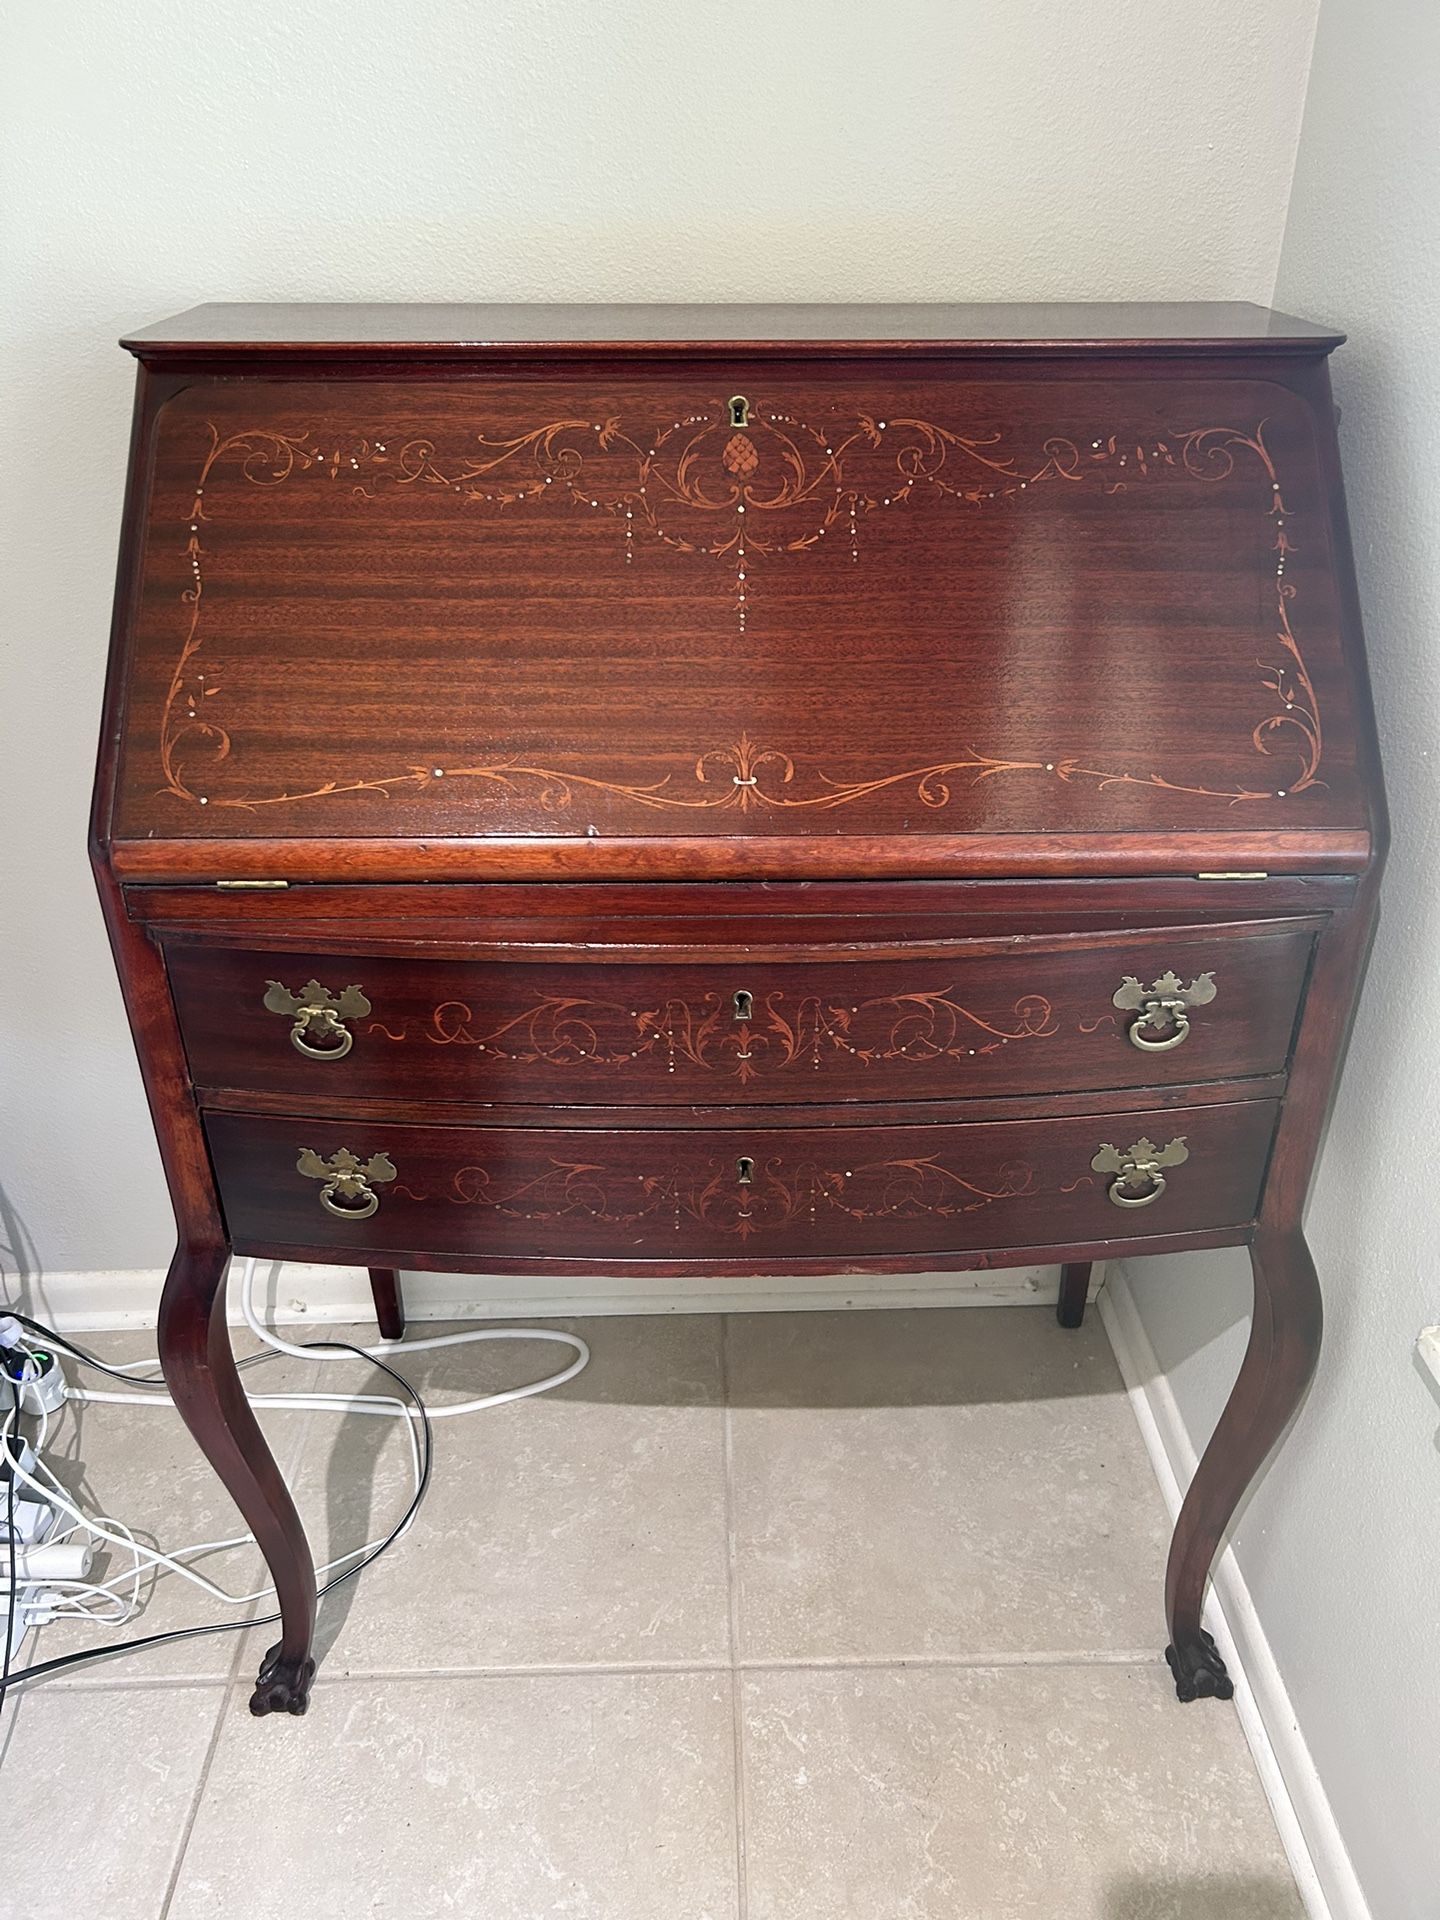 Antique Desk With Mother of Pearl Inlay